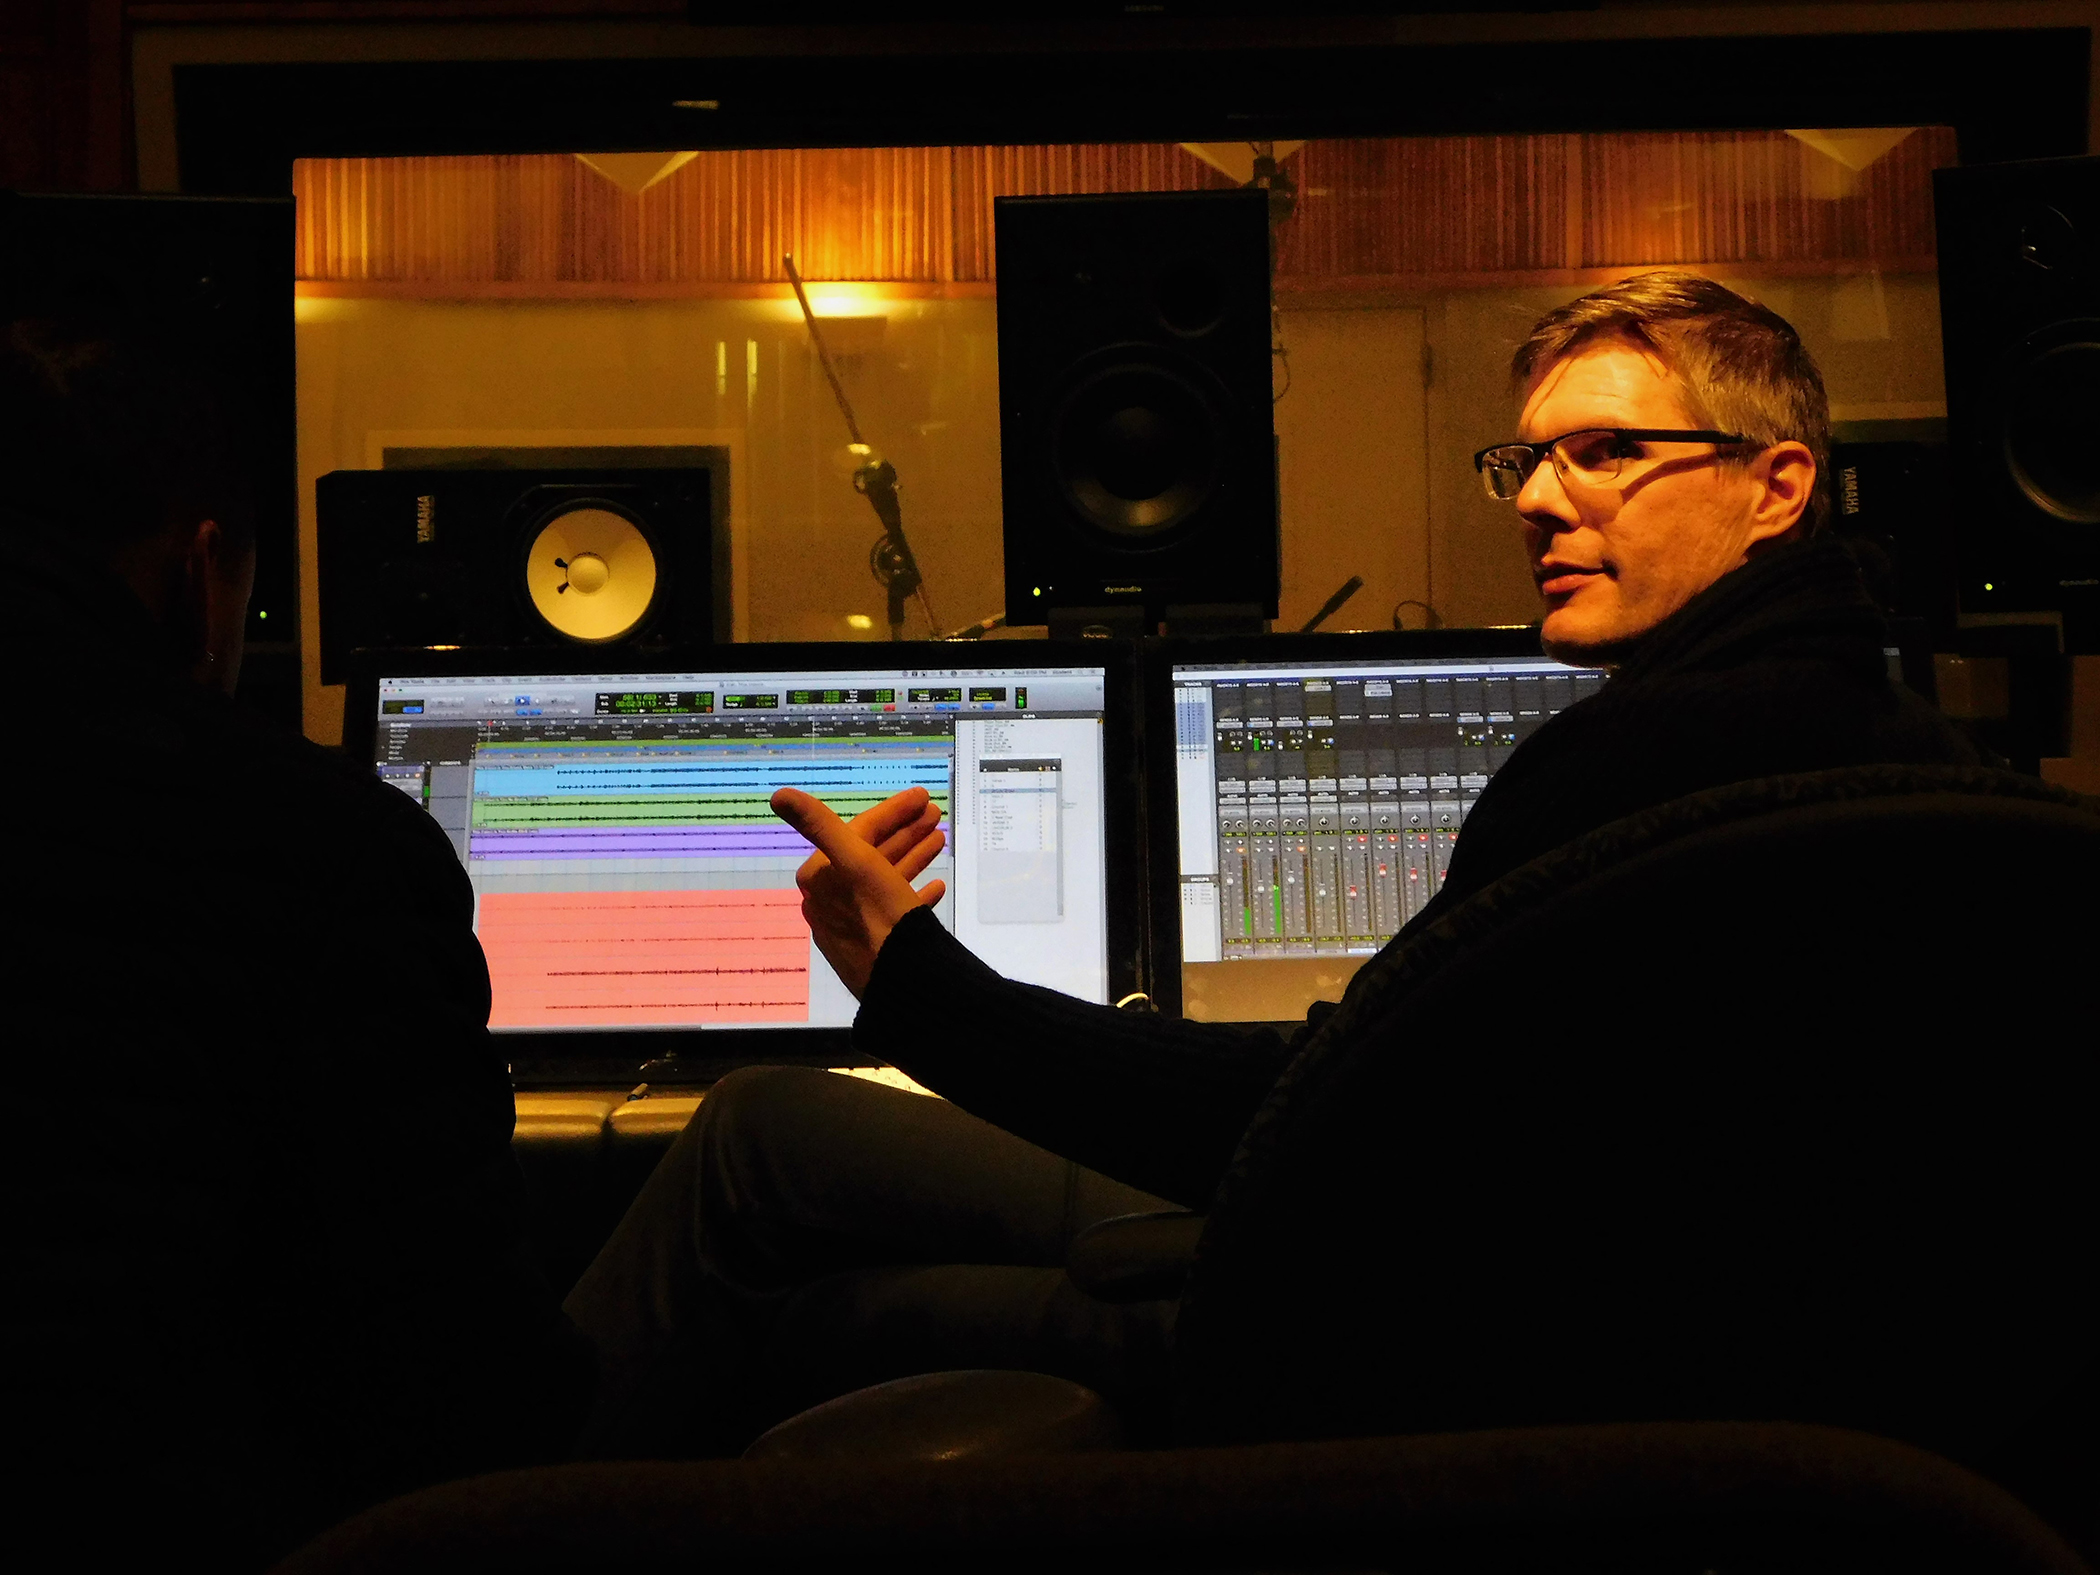 r. Christoph Thompson, recording engineer and assistant professor of music media production at Ball State University